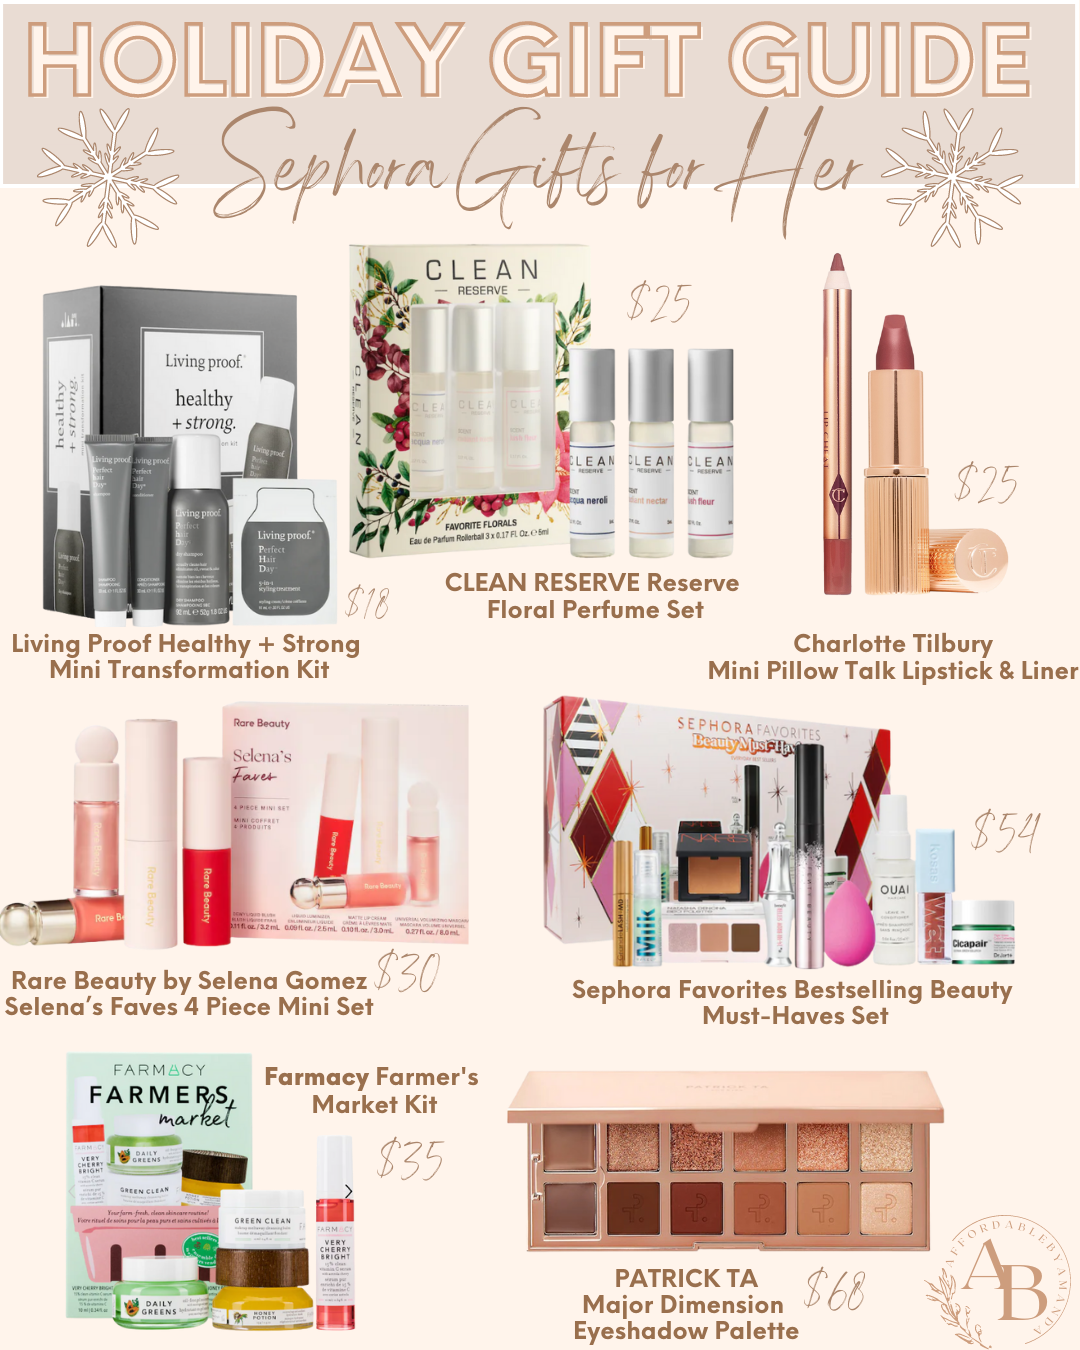 30+ Best Sephora Gifts for Her in 2021 - Affordable by Amanda